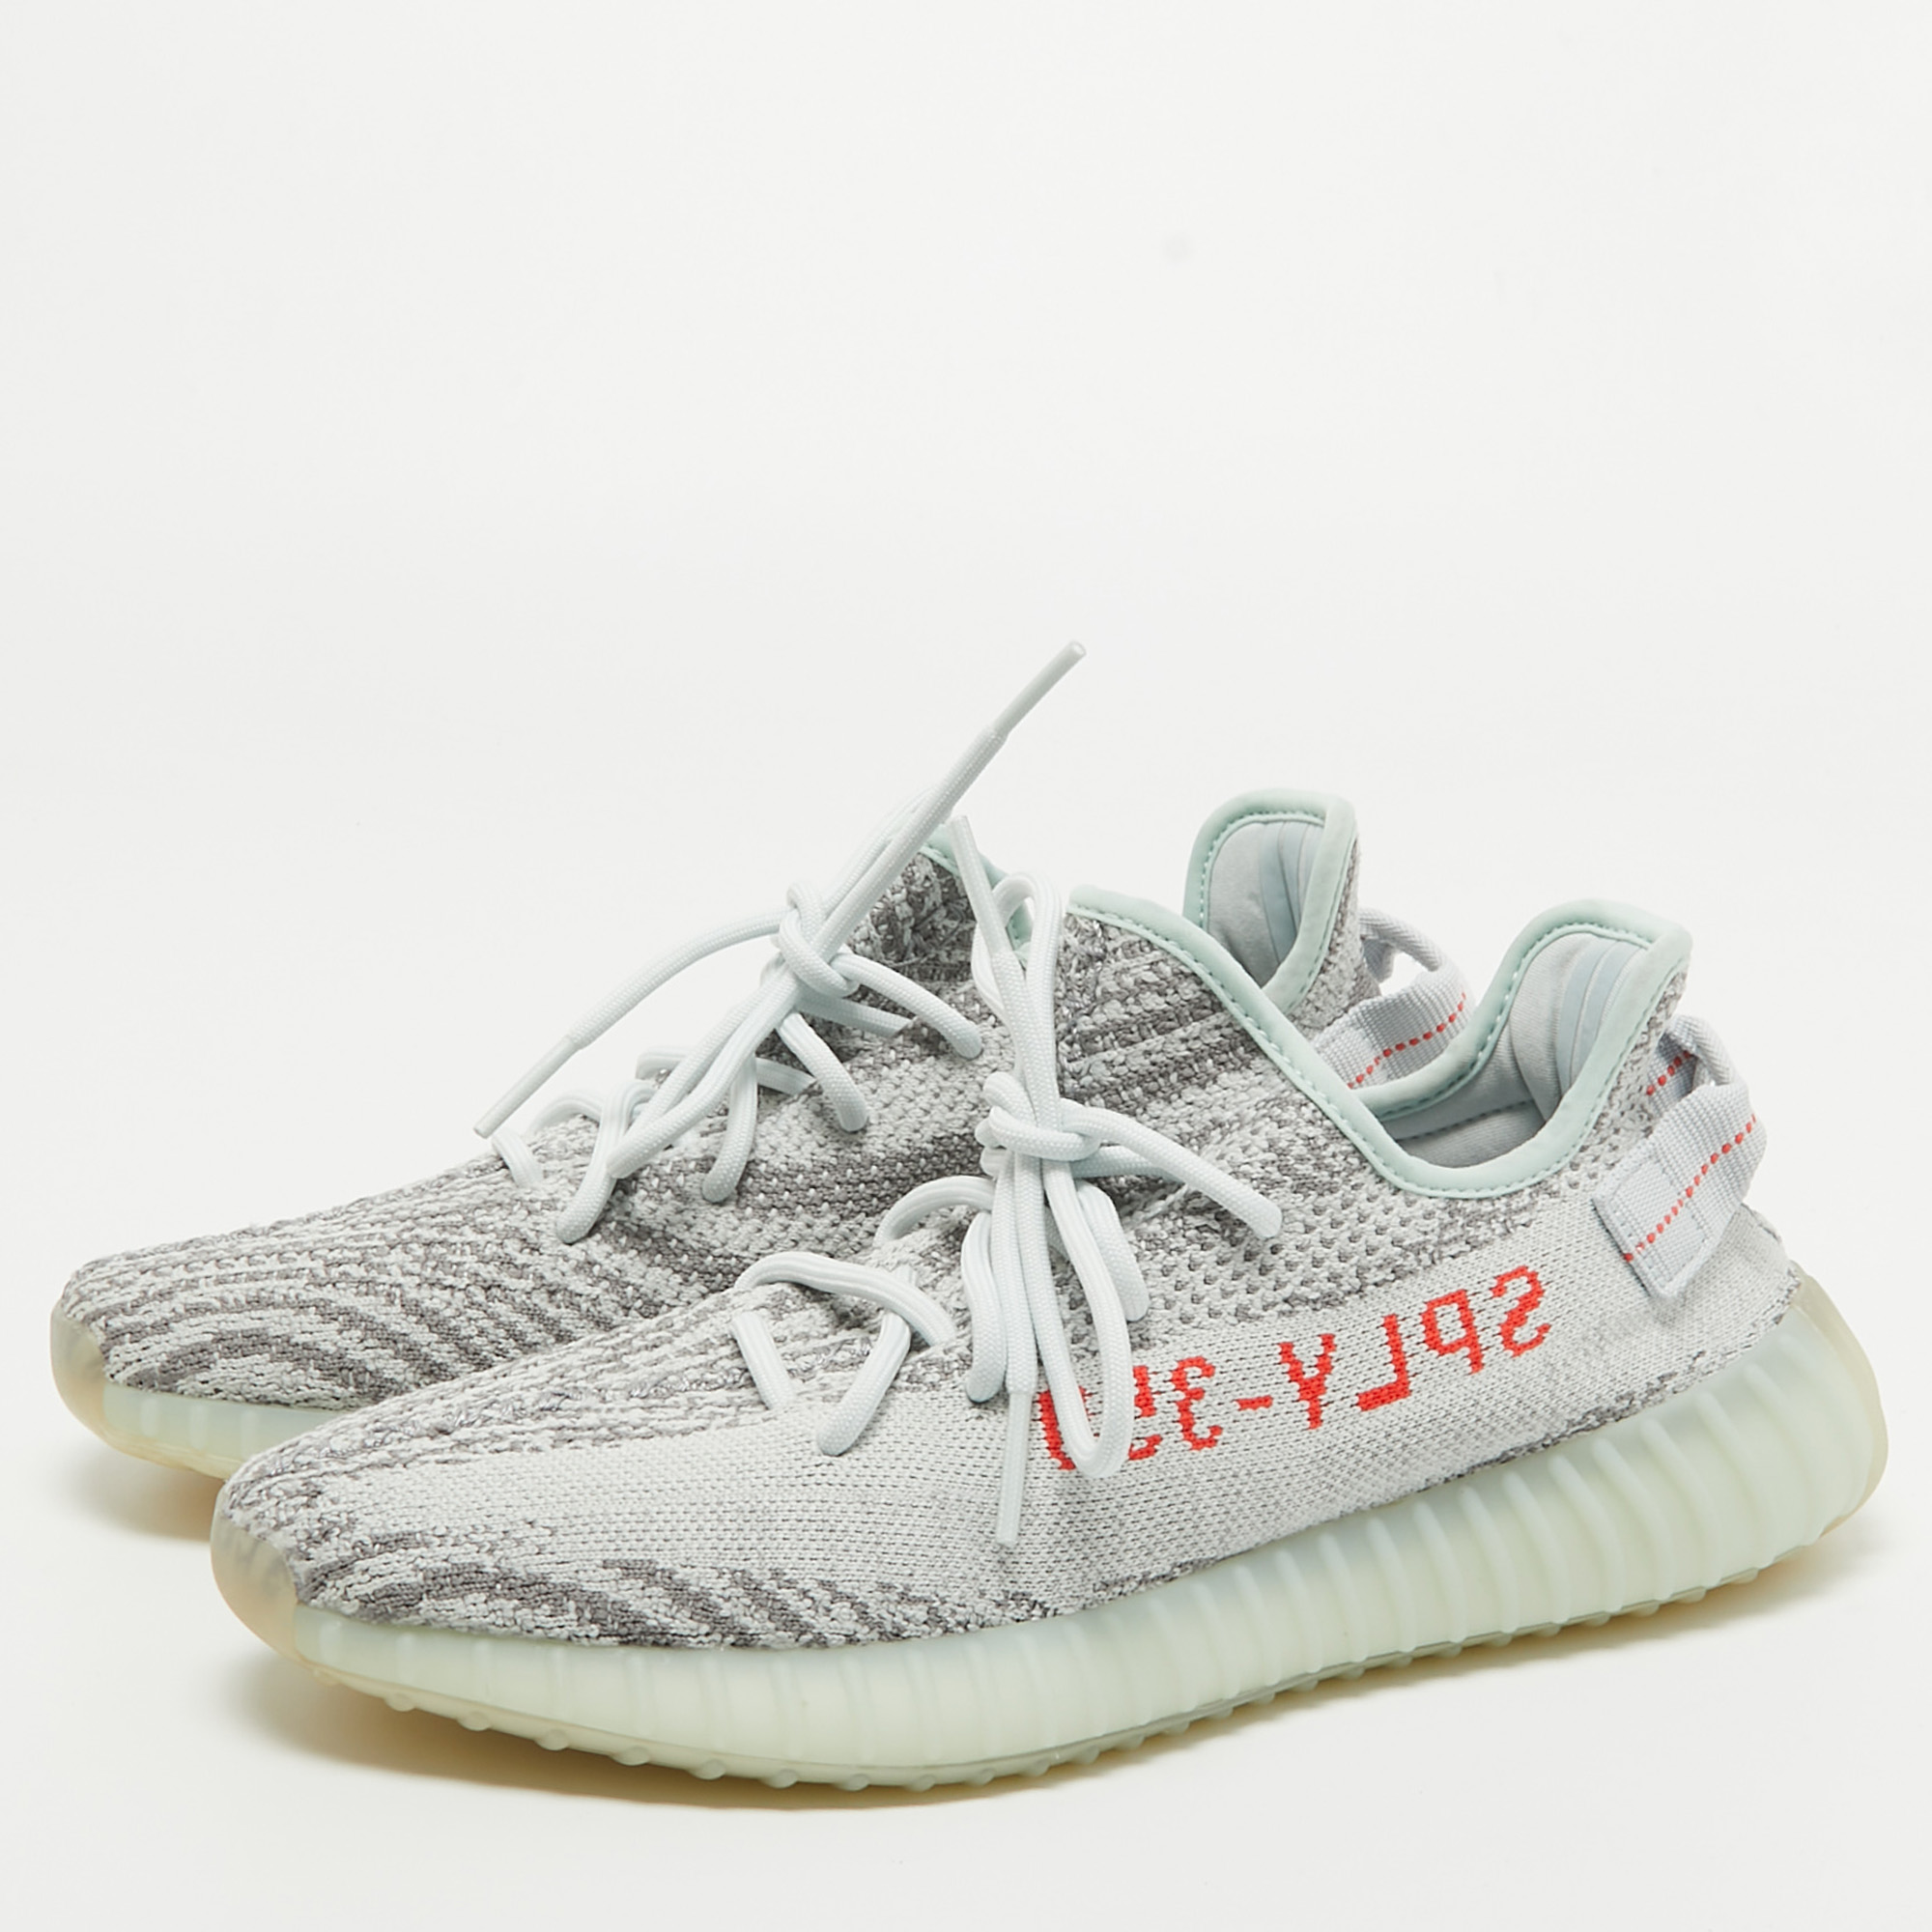 

Yeezy x Adidas Grey Knit Fabric Boost 350 V2 Blue Tint Sneakers Size 42 2/3